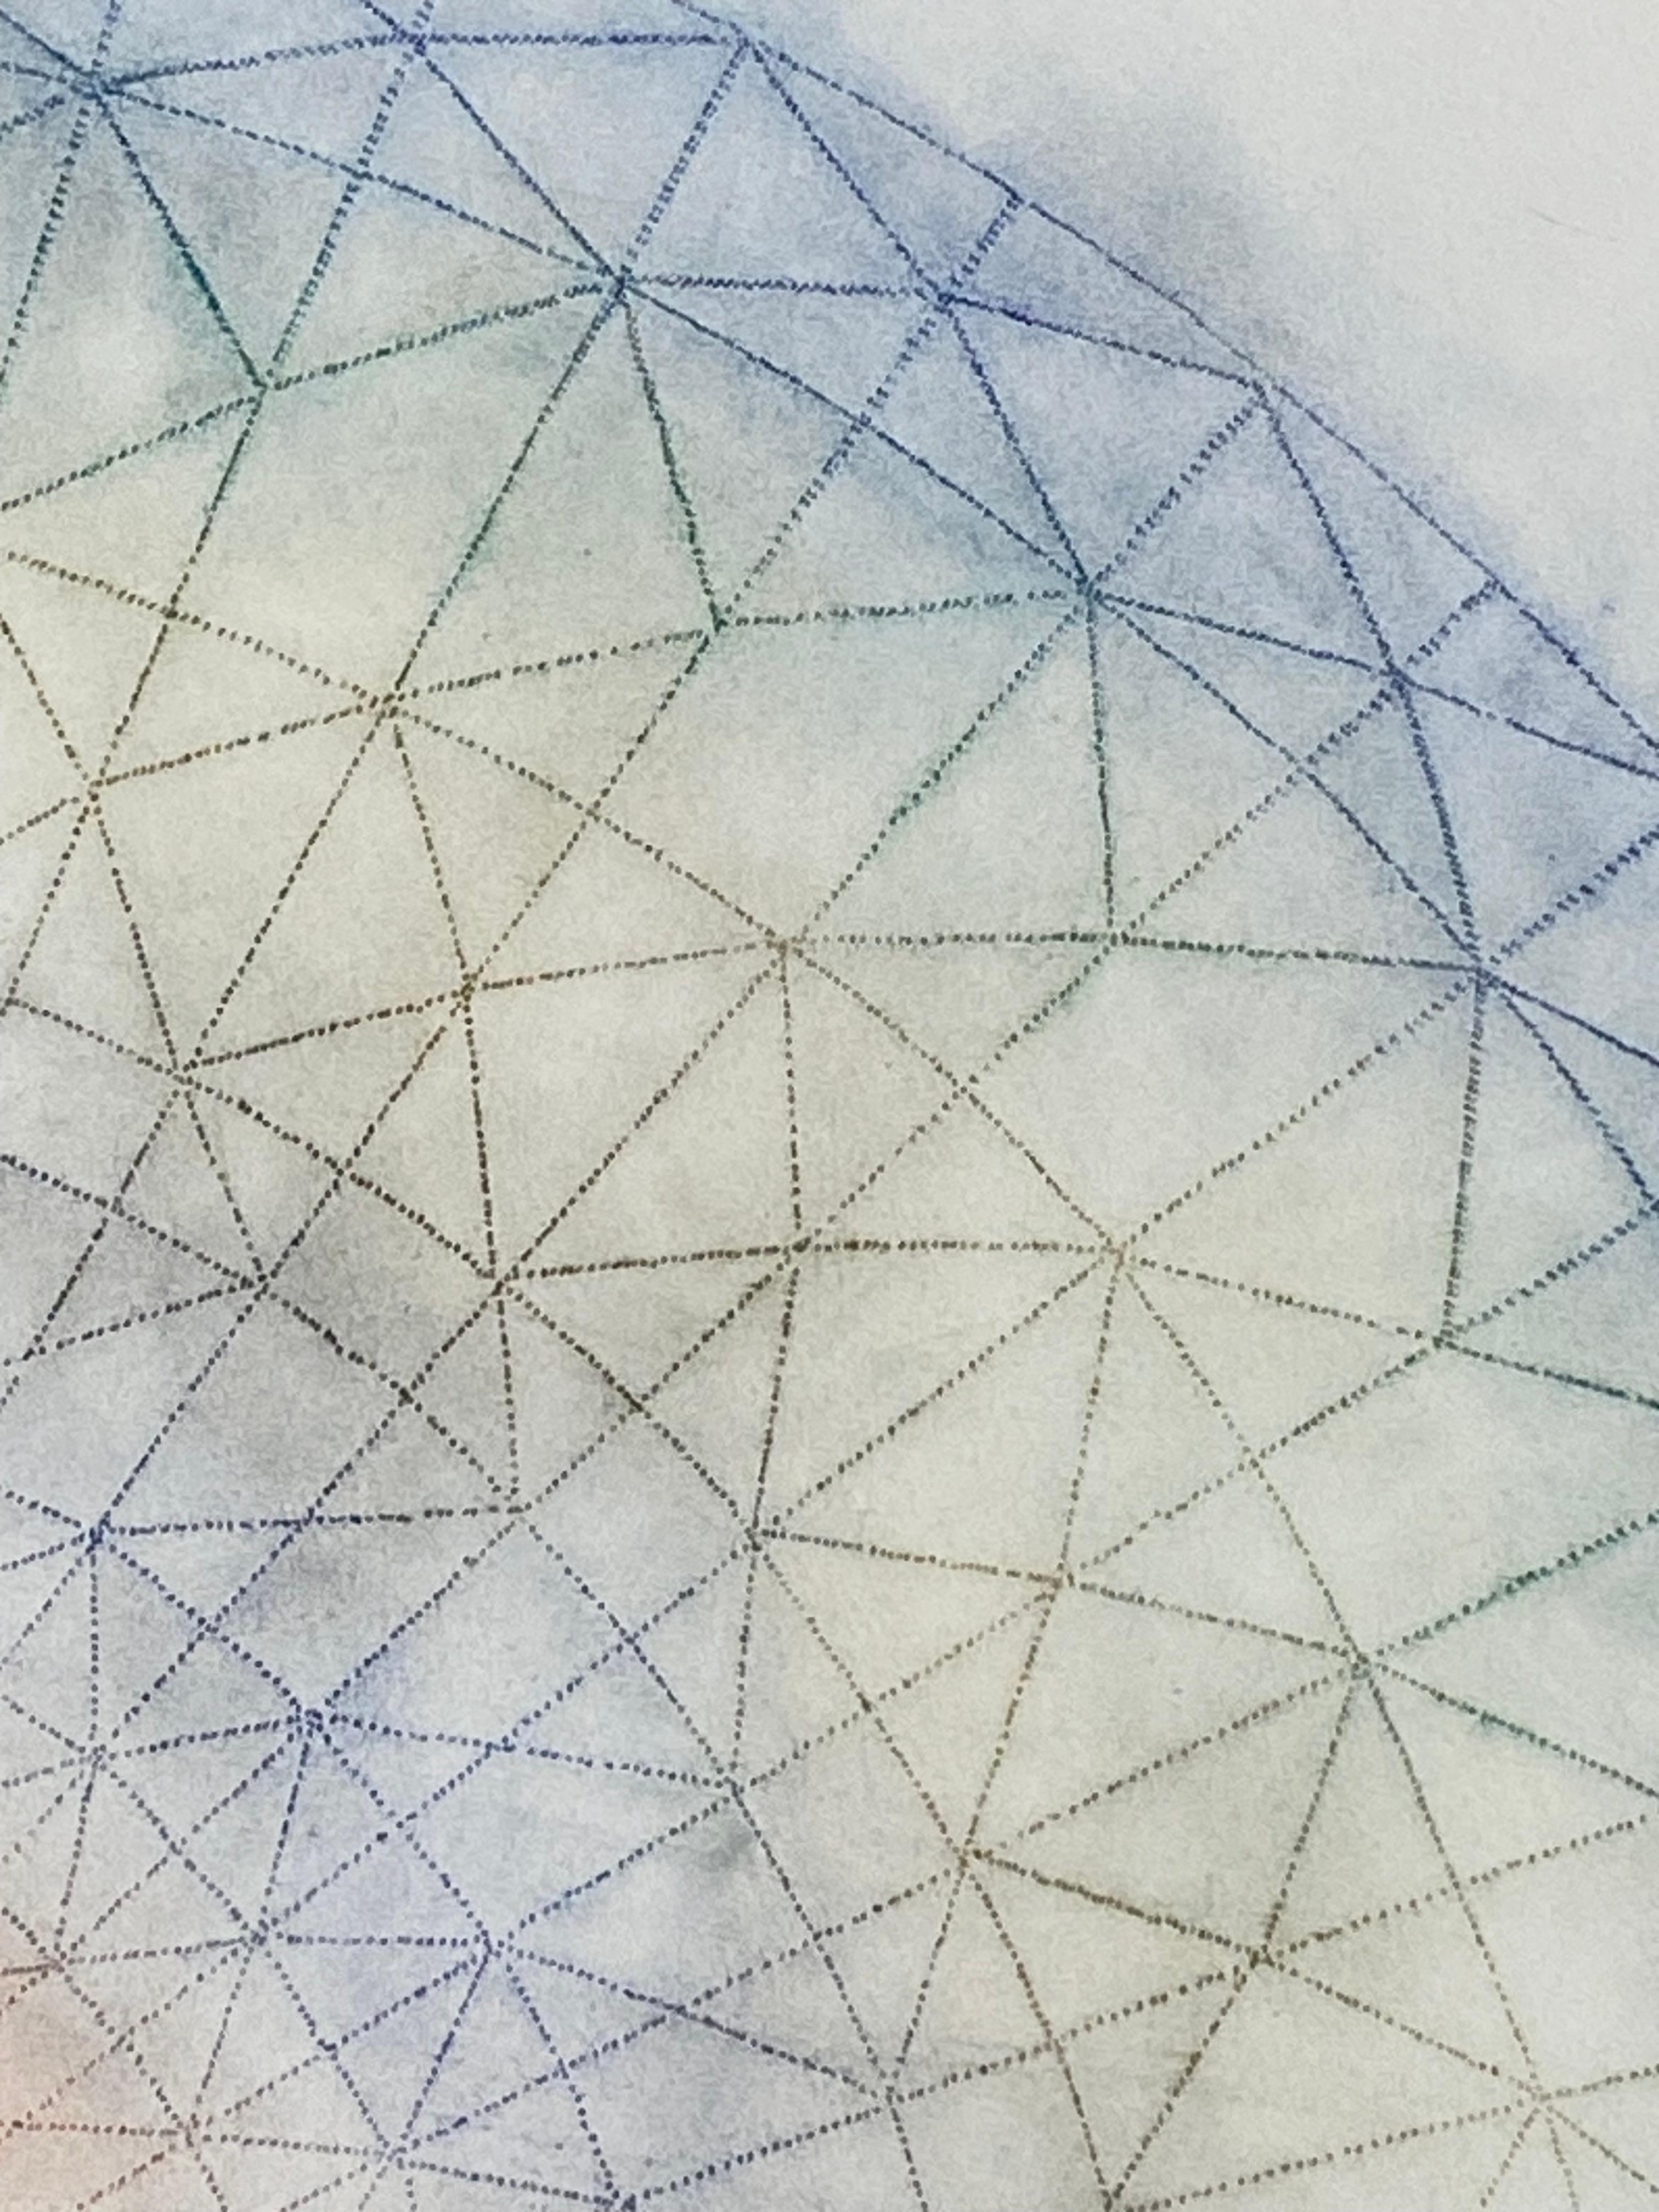 This multicolored drawing has a beautiful, soft mottled texture created with Judge's unique powered pigment technique. Primavera Pop 27 is a predominately blue and green mandala shape with orange and red at the center creating an intricately layered